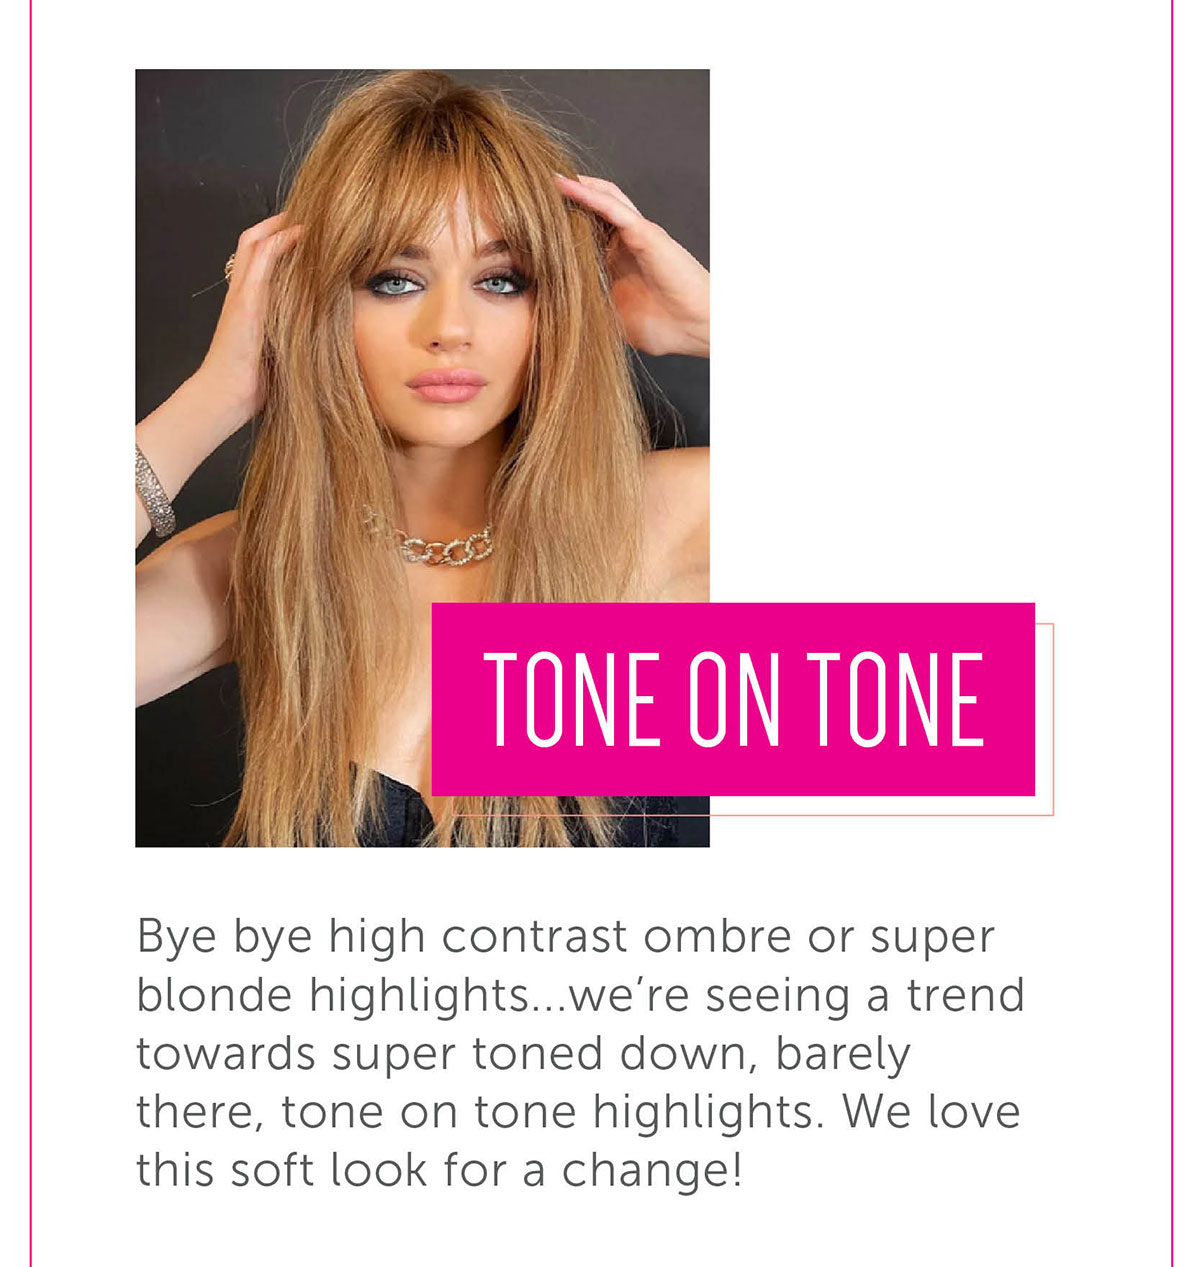 Tone on Tone Bye bye high contrast ombre or super blonde highlights...we’re seeing a trend towards super toned down, barely there, tone on tone highlights. We love this soft look for a change!